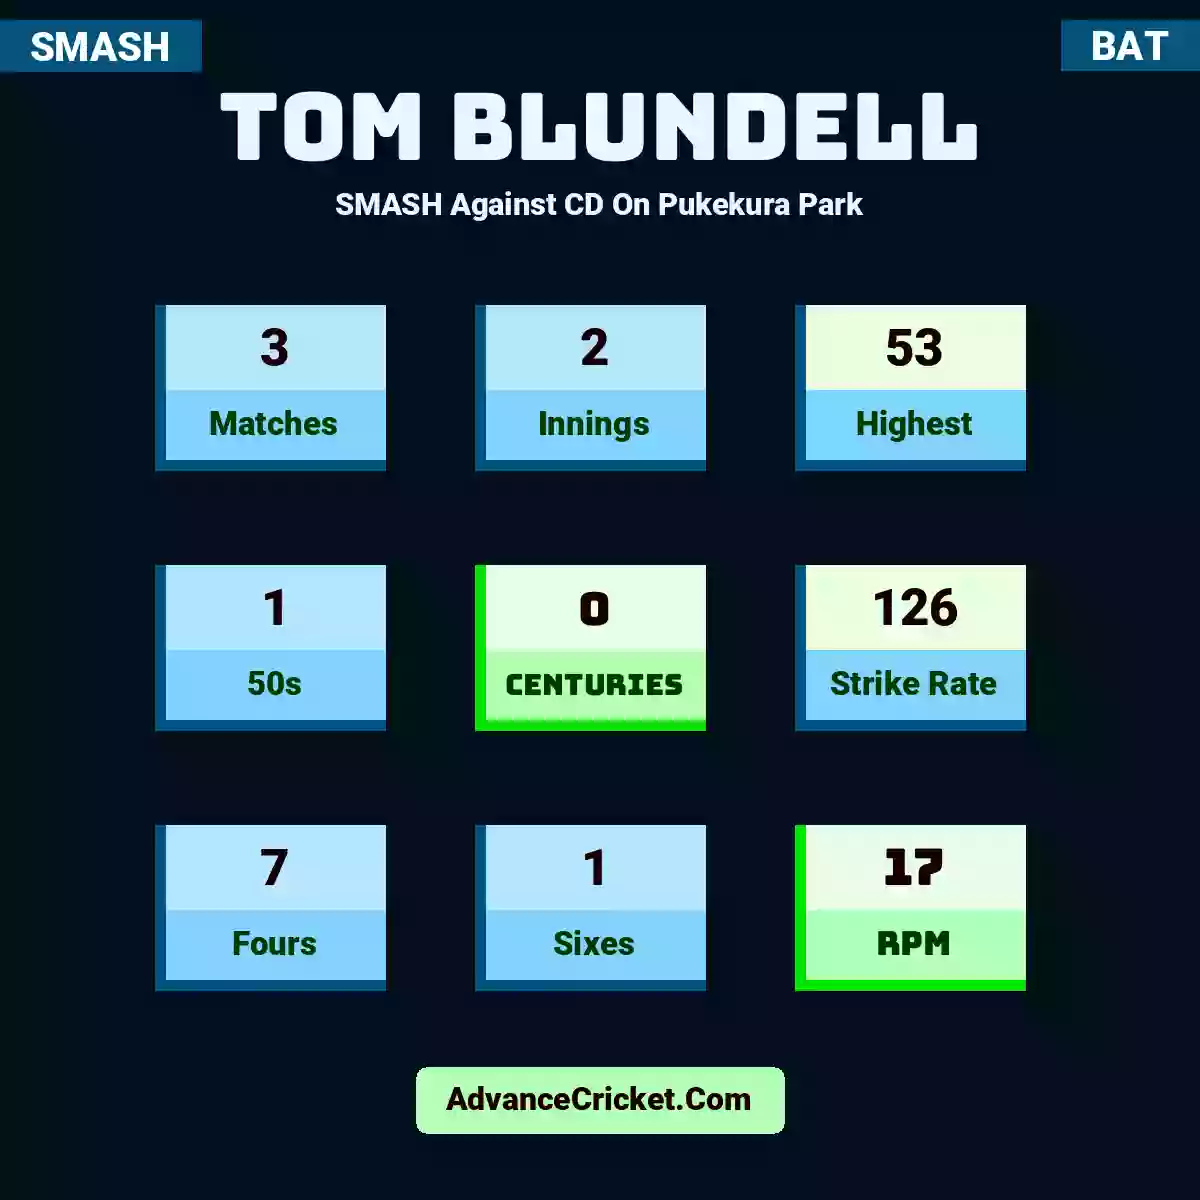 Tom Blundell SMASH  Against CD On Pukekura Park, Tom Blundell played 3 matches, scored 53 runs as highest, 1 half-centuries, and 0 centuries, with a strike rate of 126. T.Blundell hit 7 fours and 1 sixes, with an RPM of 17.